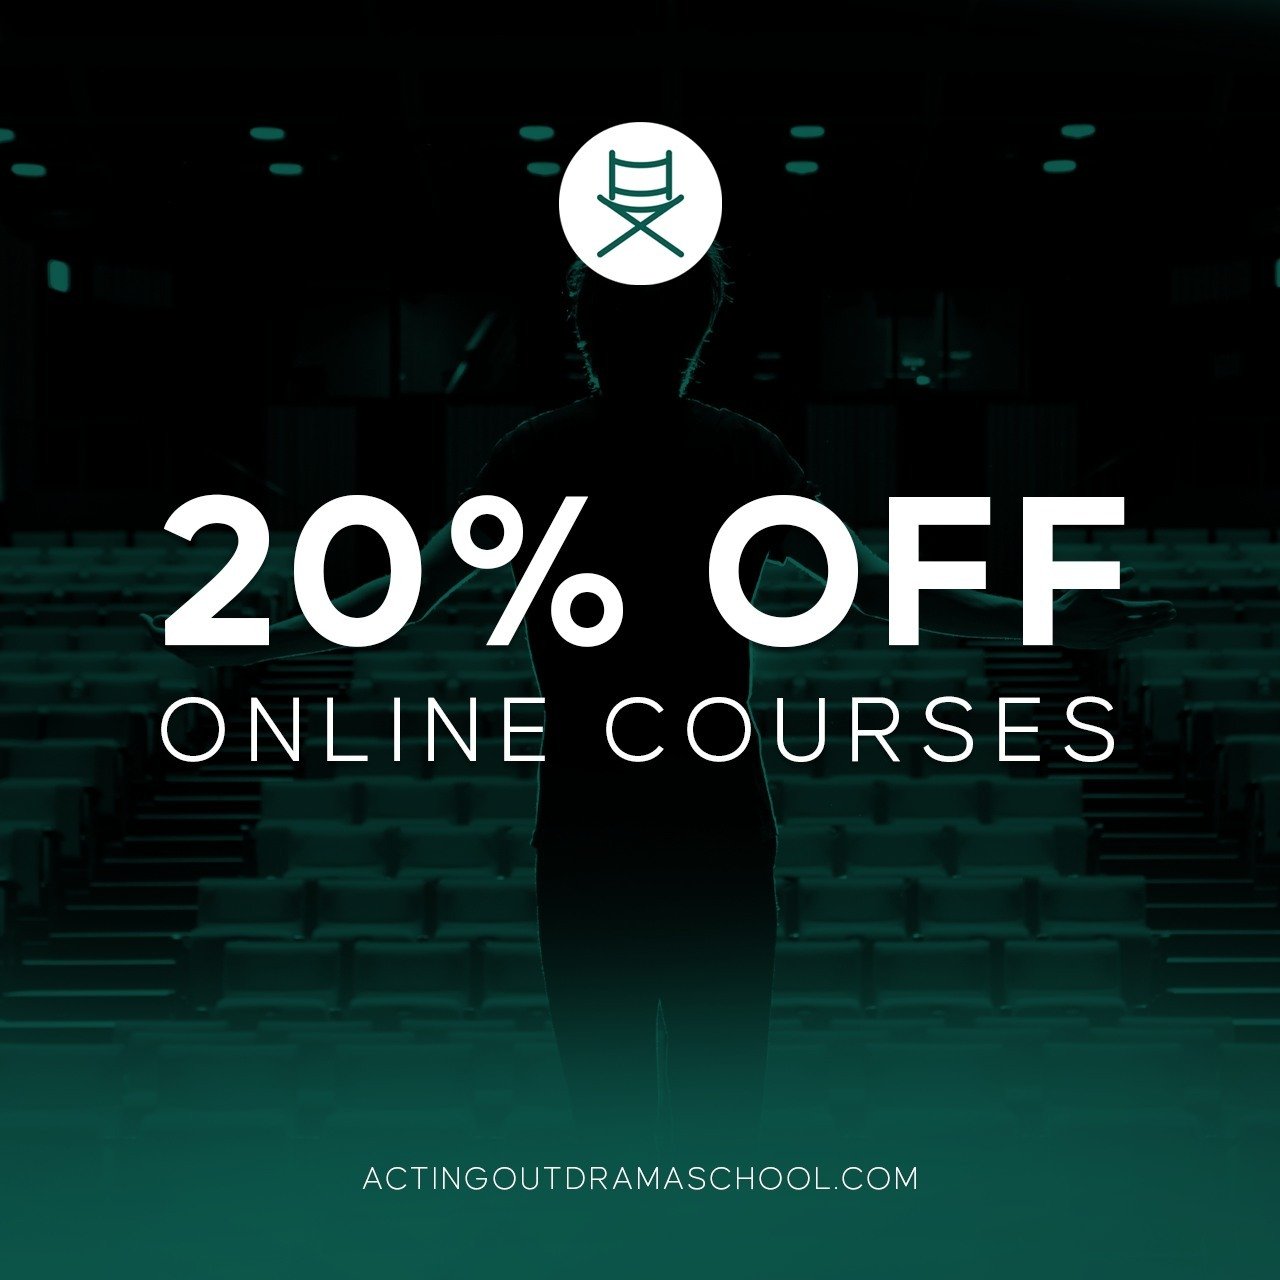 To continue on our celebrations for our 20th Anniversary this week, we're offering an exclusive 20% discount on our online courses! 😍

Use the code HAPPY20 until Monday, 6th May on the following online courses:

STANISLAVSKI INTENSIVE 

SHAKESPEAR A